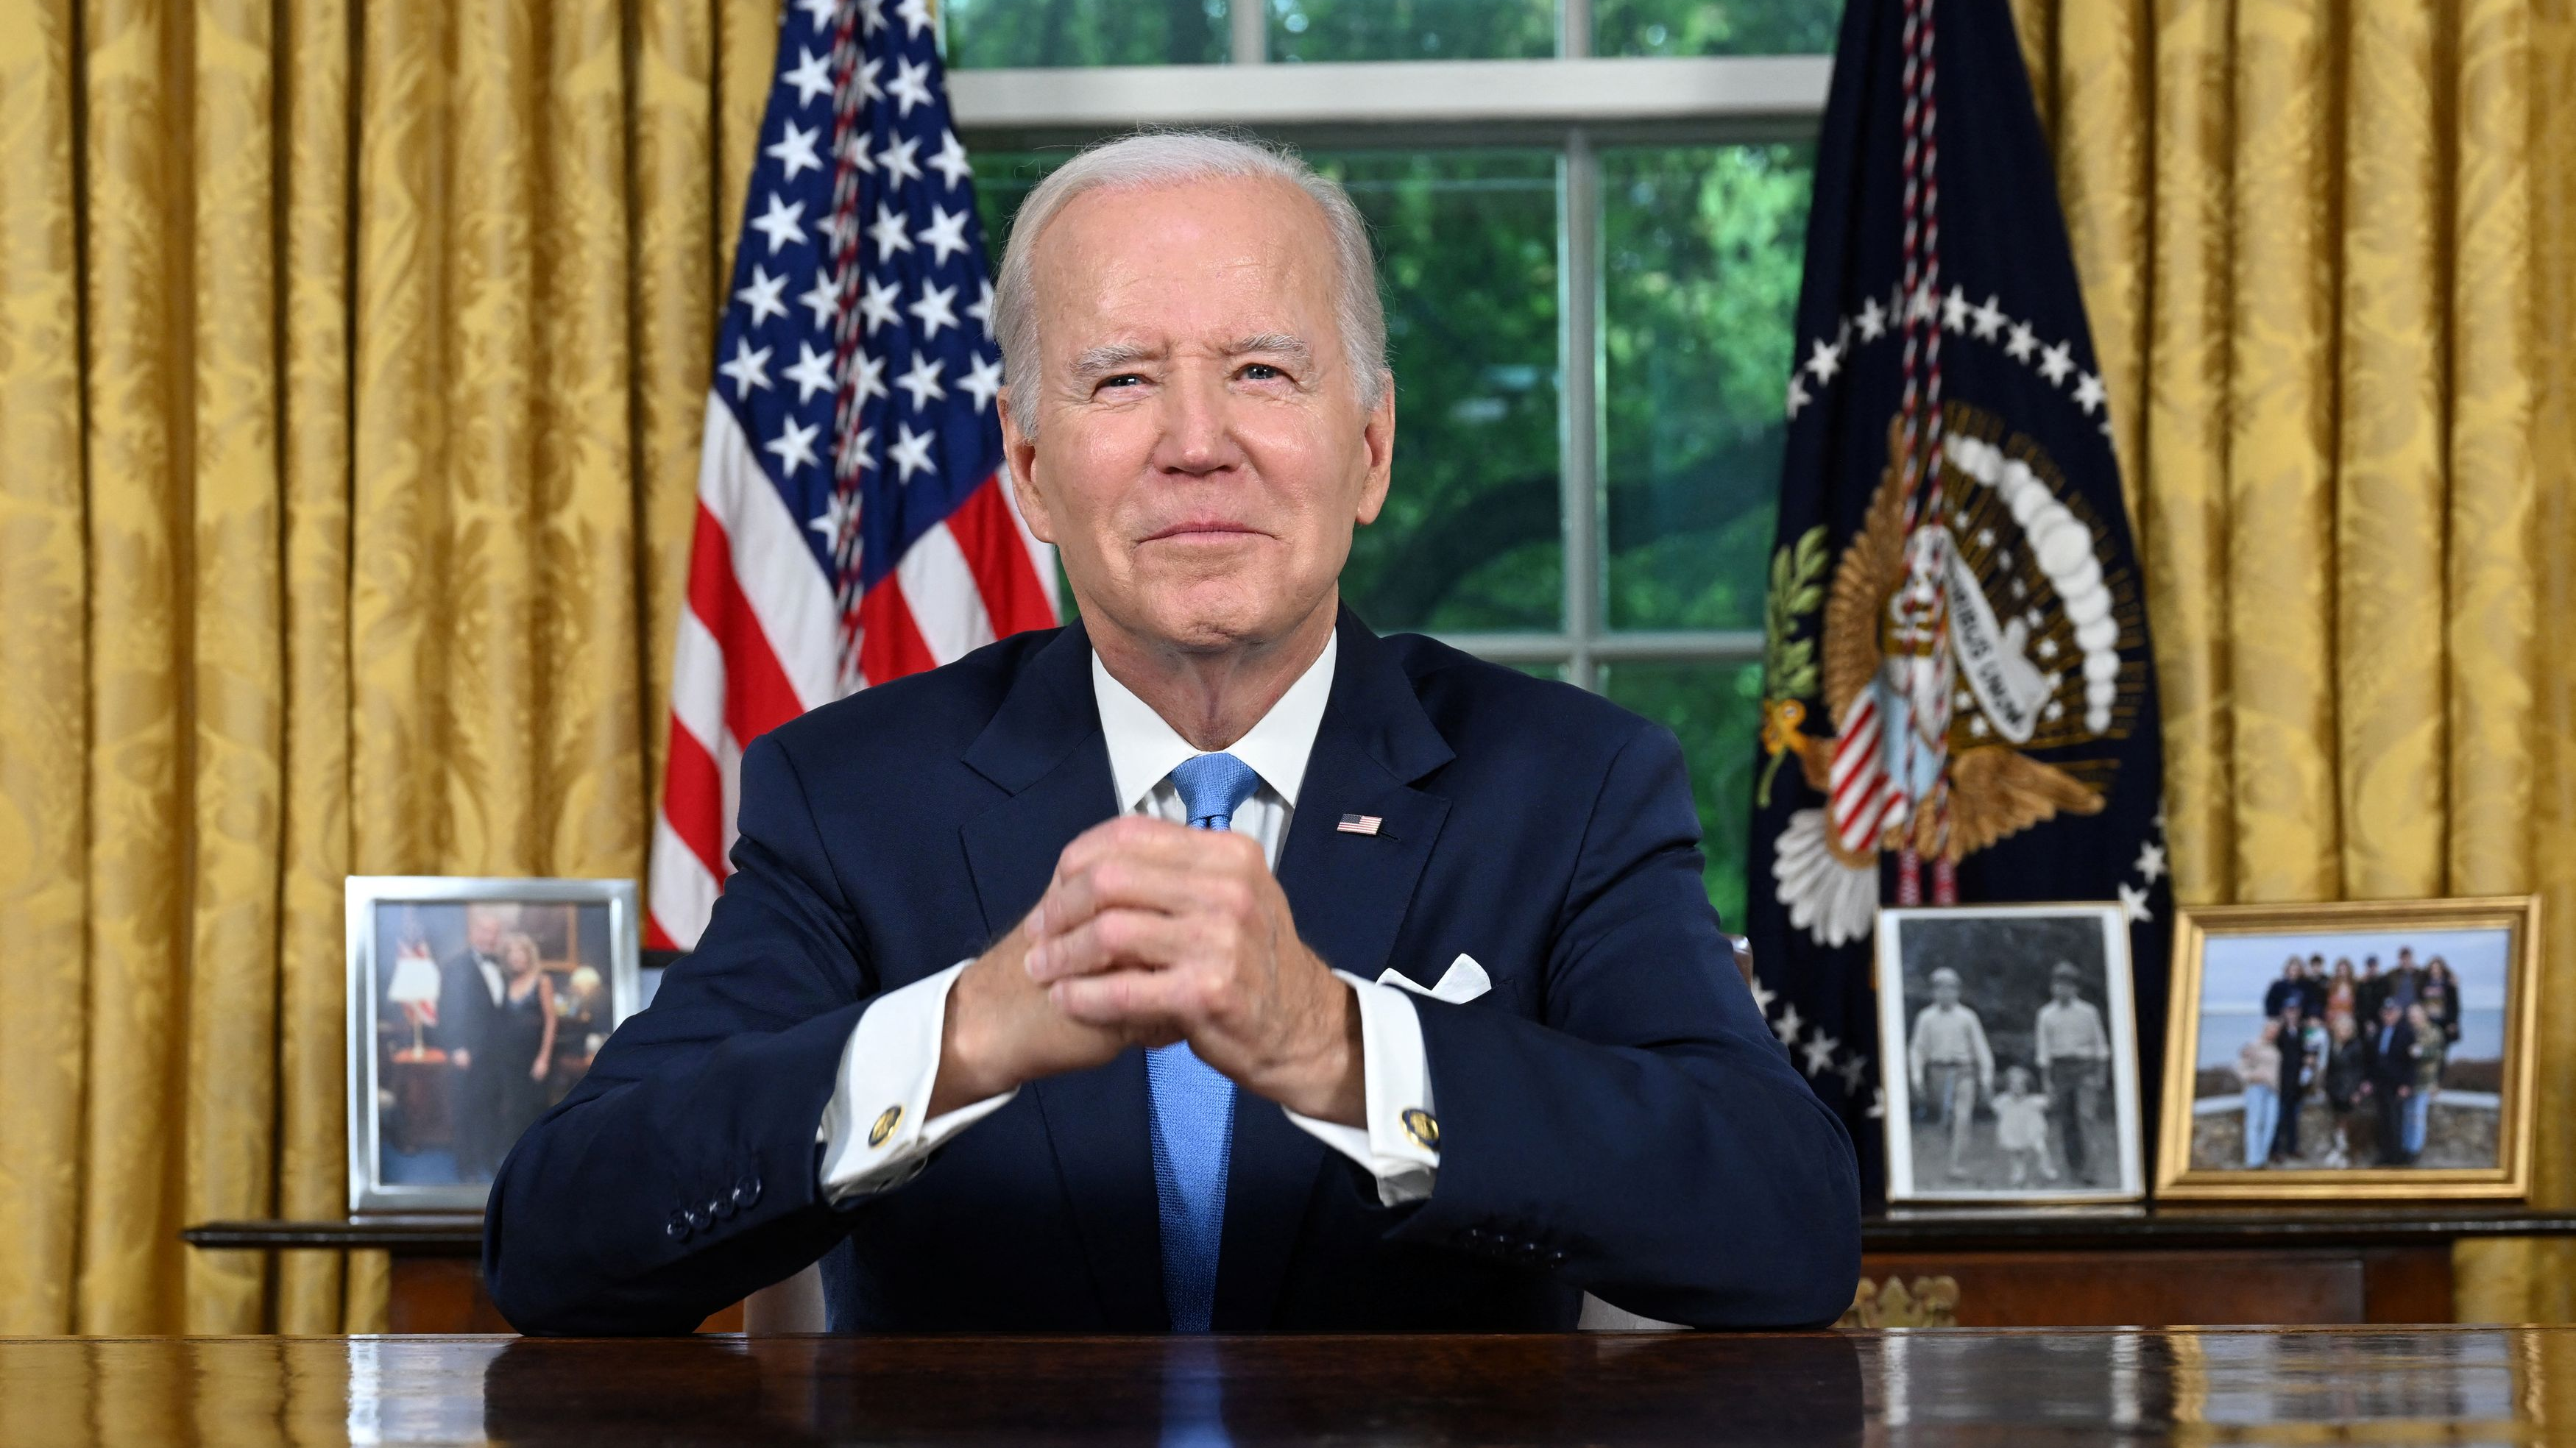 U.S. President Joe Biden addresses the nation on averting default and the Bipartisan Budget Agreement, in the Oval Office of the White House in Washington, D.C., June 2, 2023. /Reuters